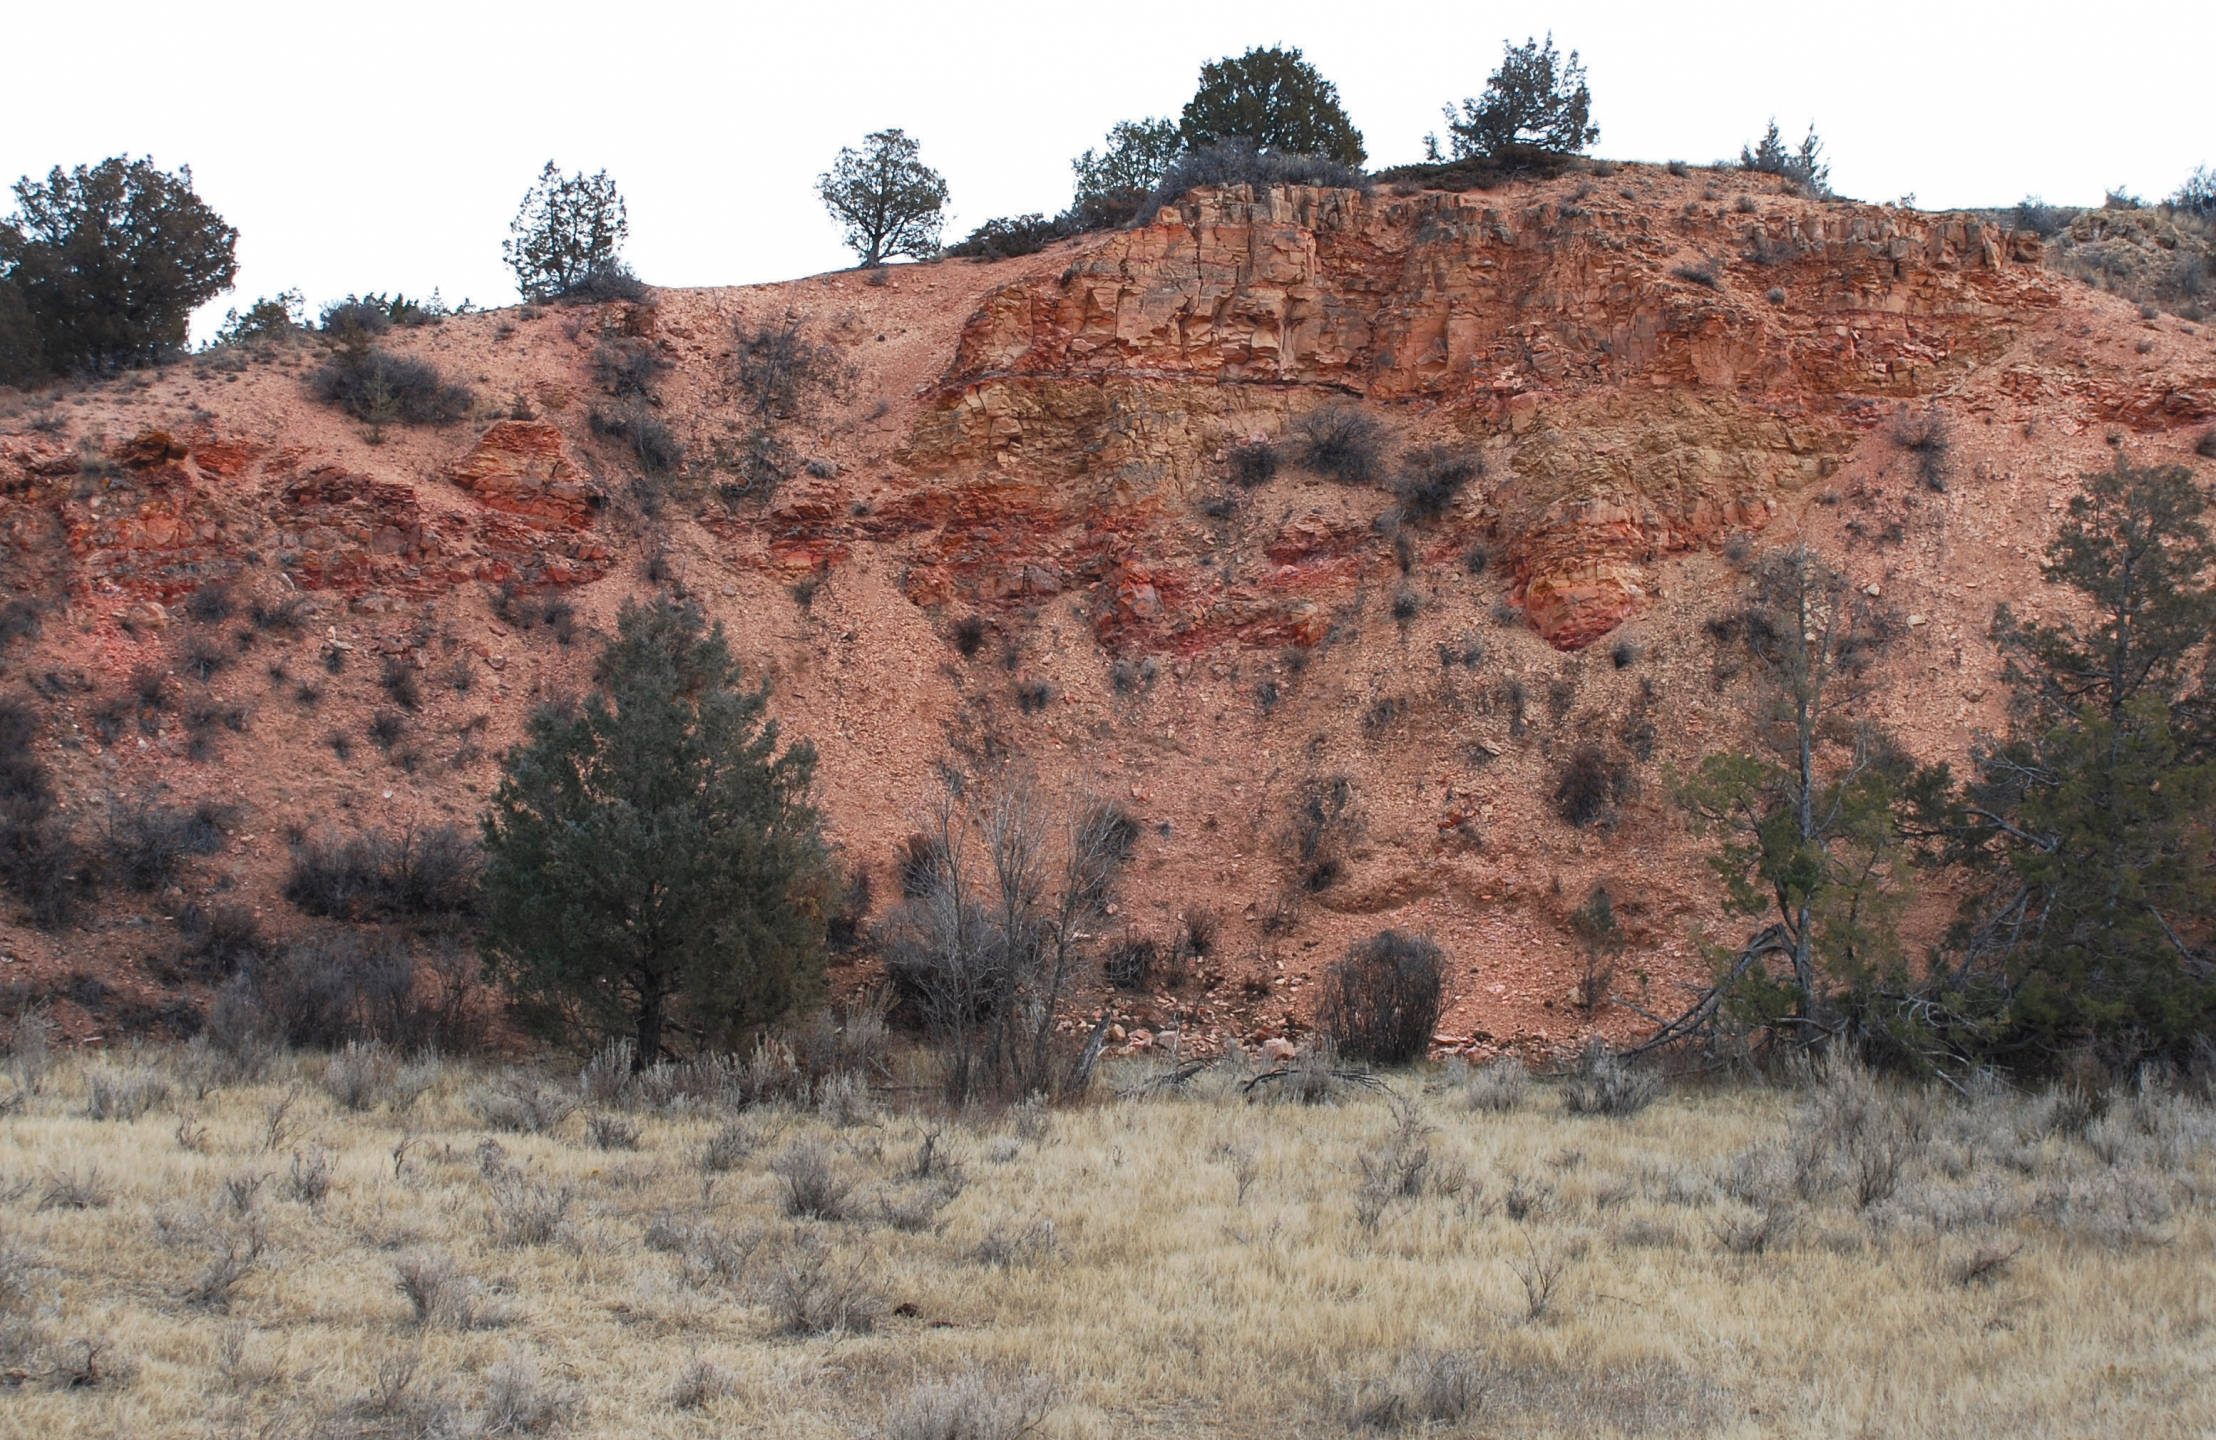 A hill composed of red rocks.